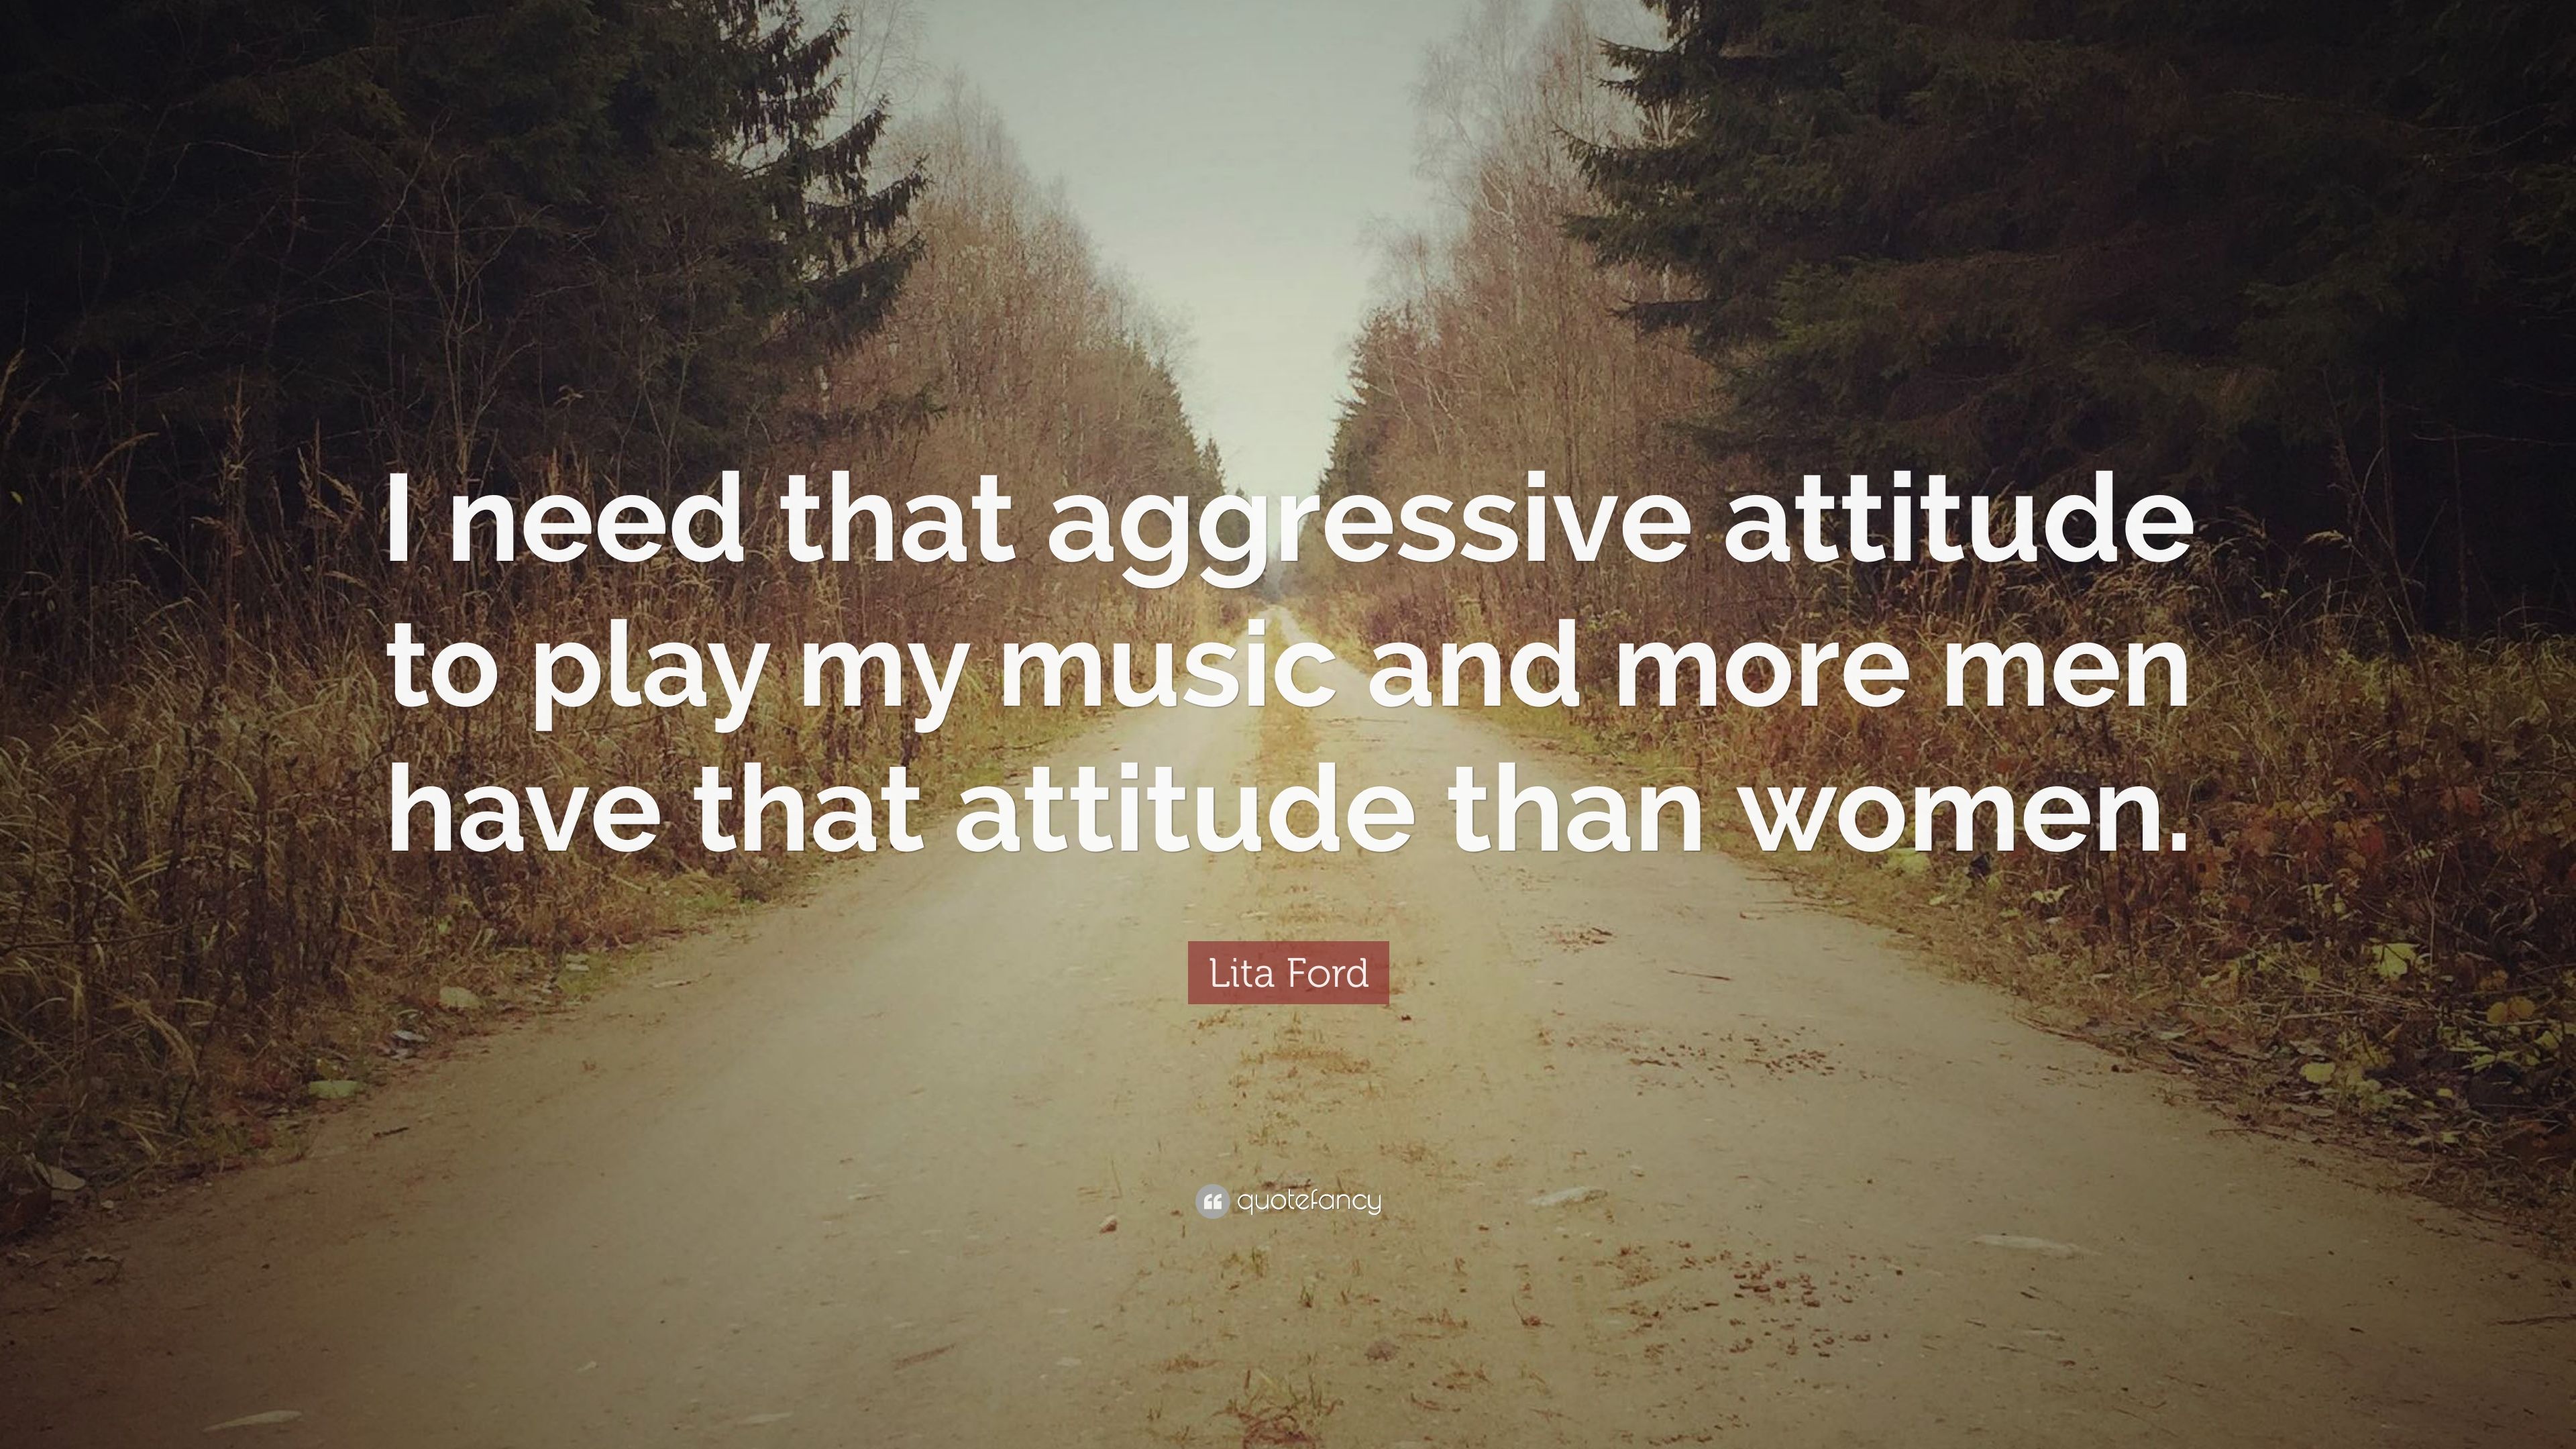 Lita Ford Quote: “I need that aggressive attitude to play my music